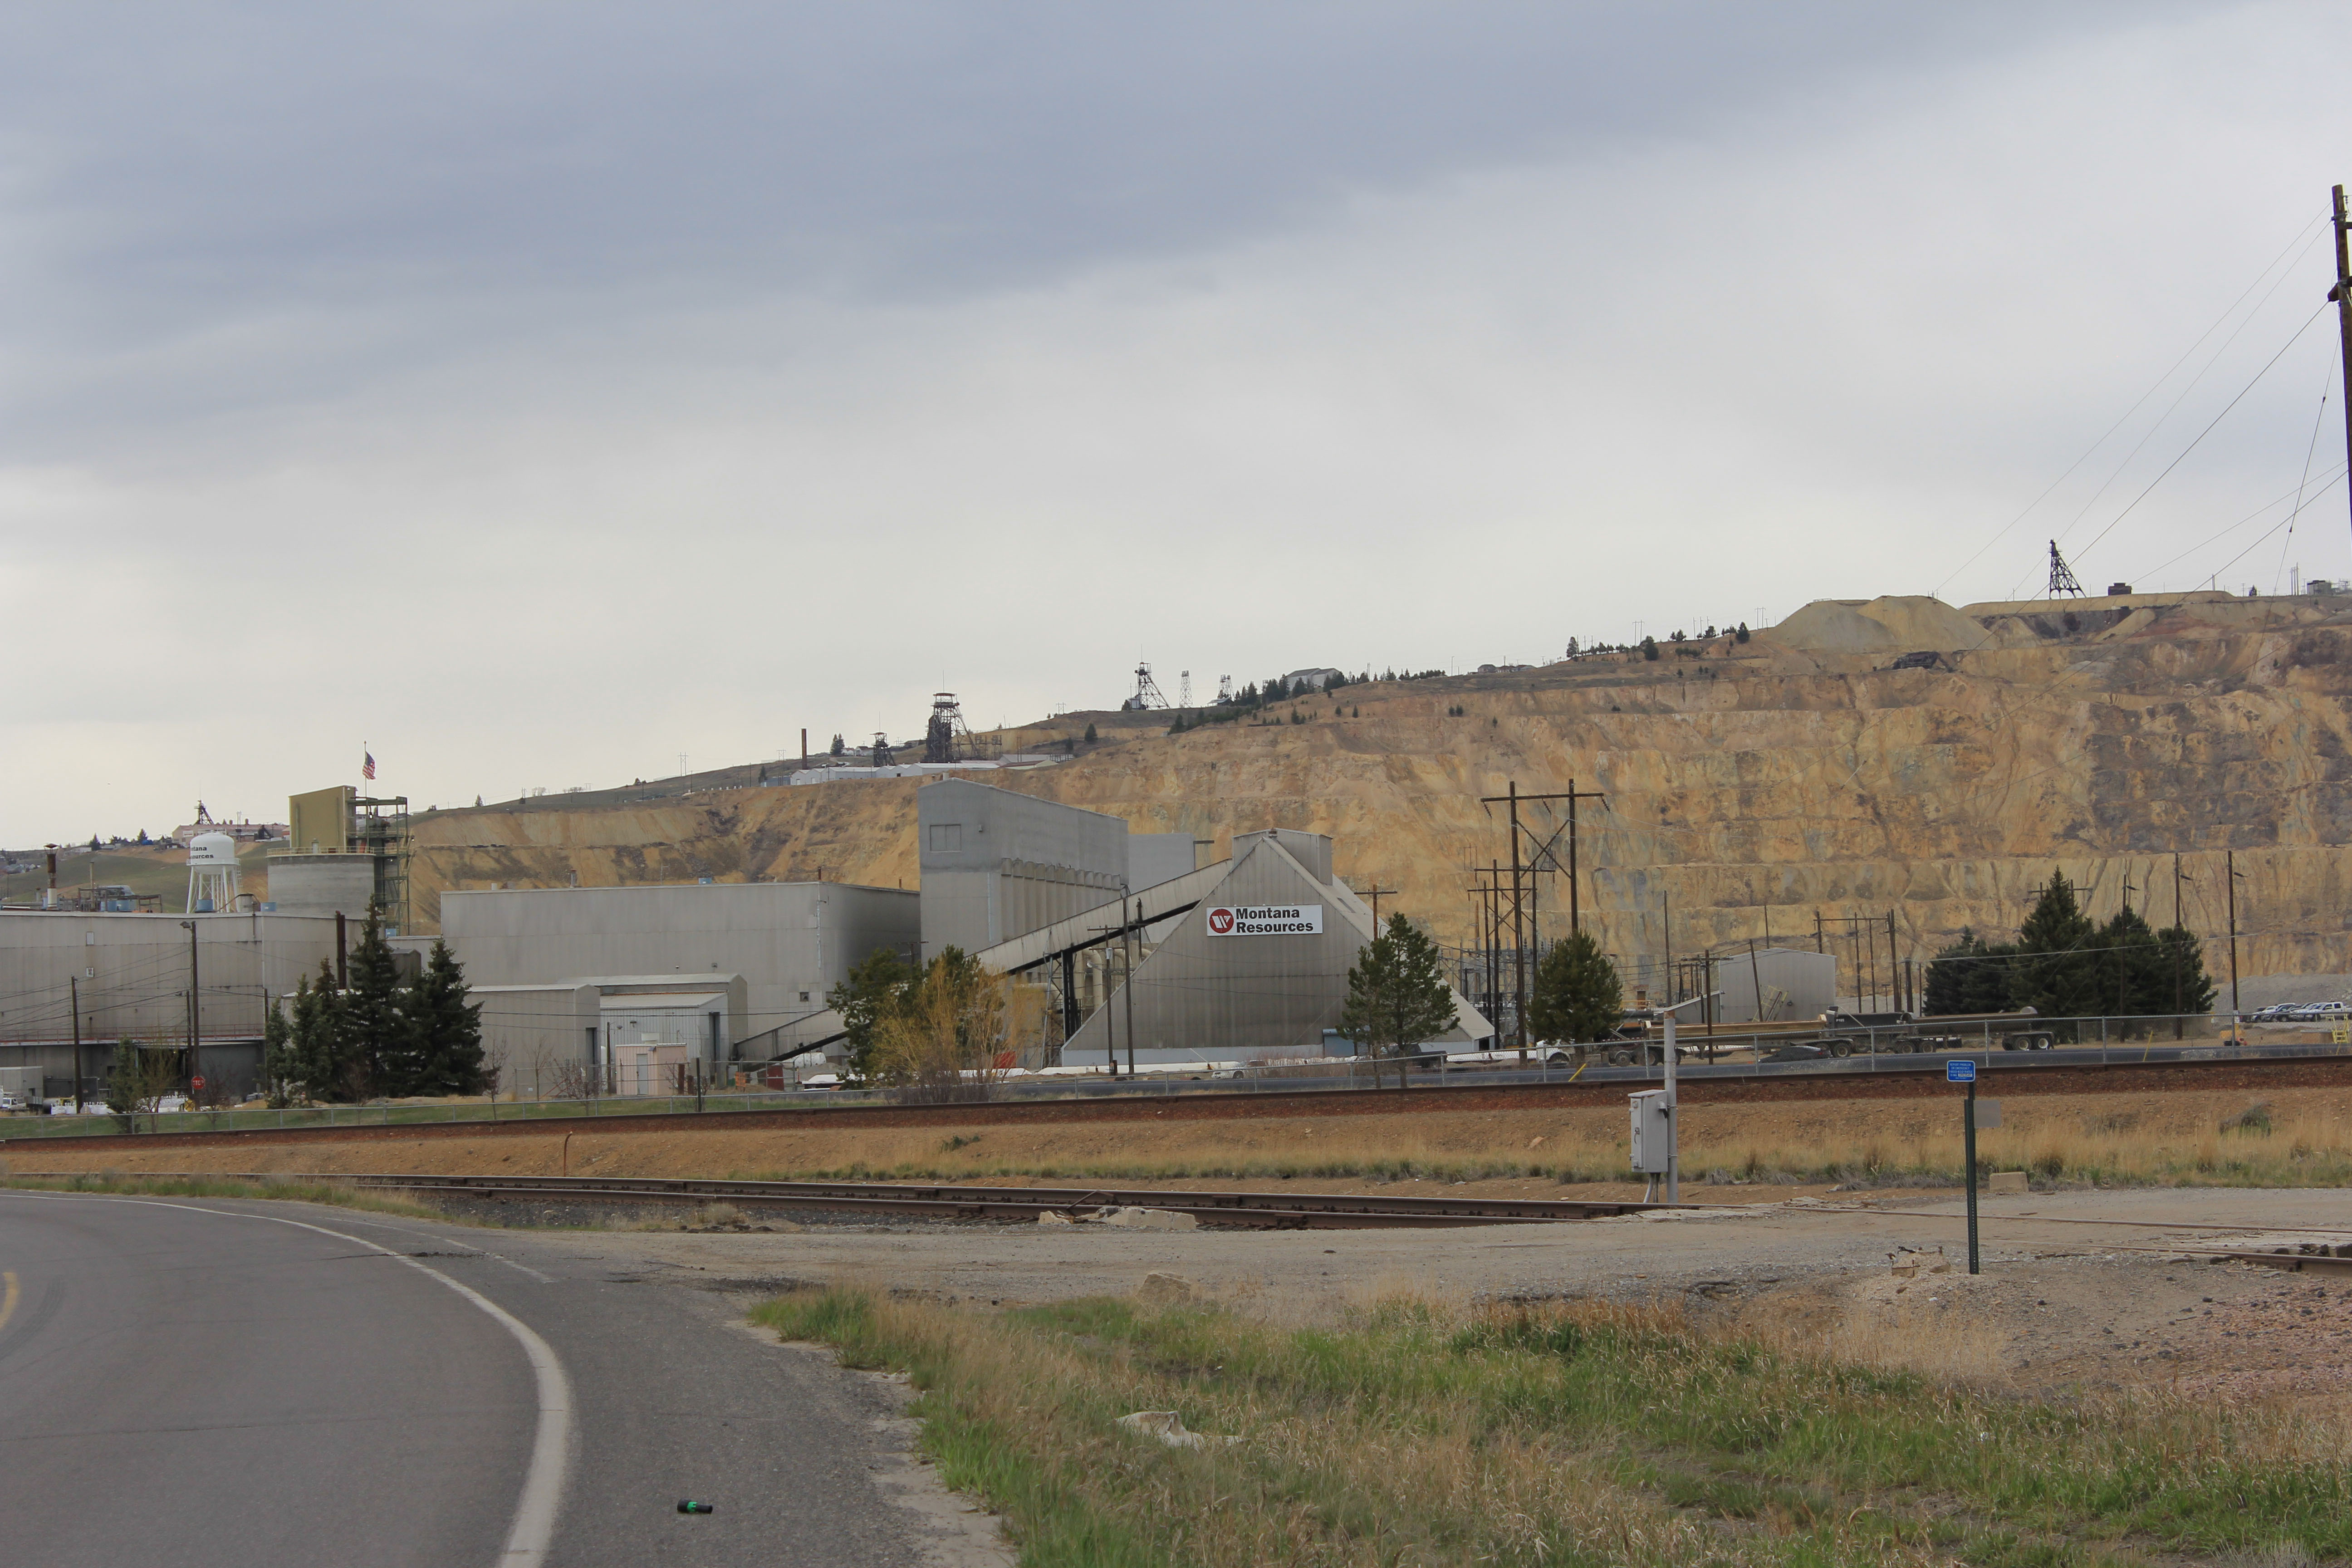 A landscape photograph of Montana Resources open-pit mine. Behind the mine are tall, sepia colored cliffs and an overcast grey sky.